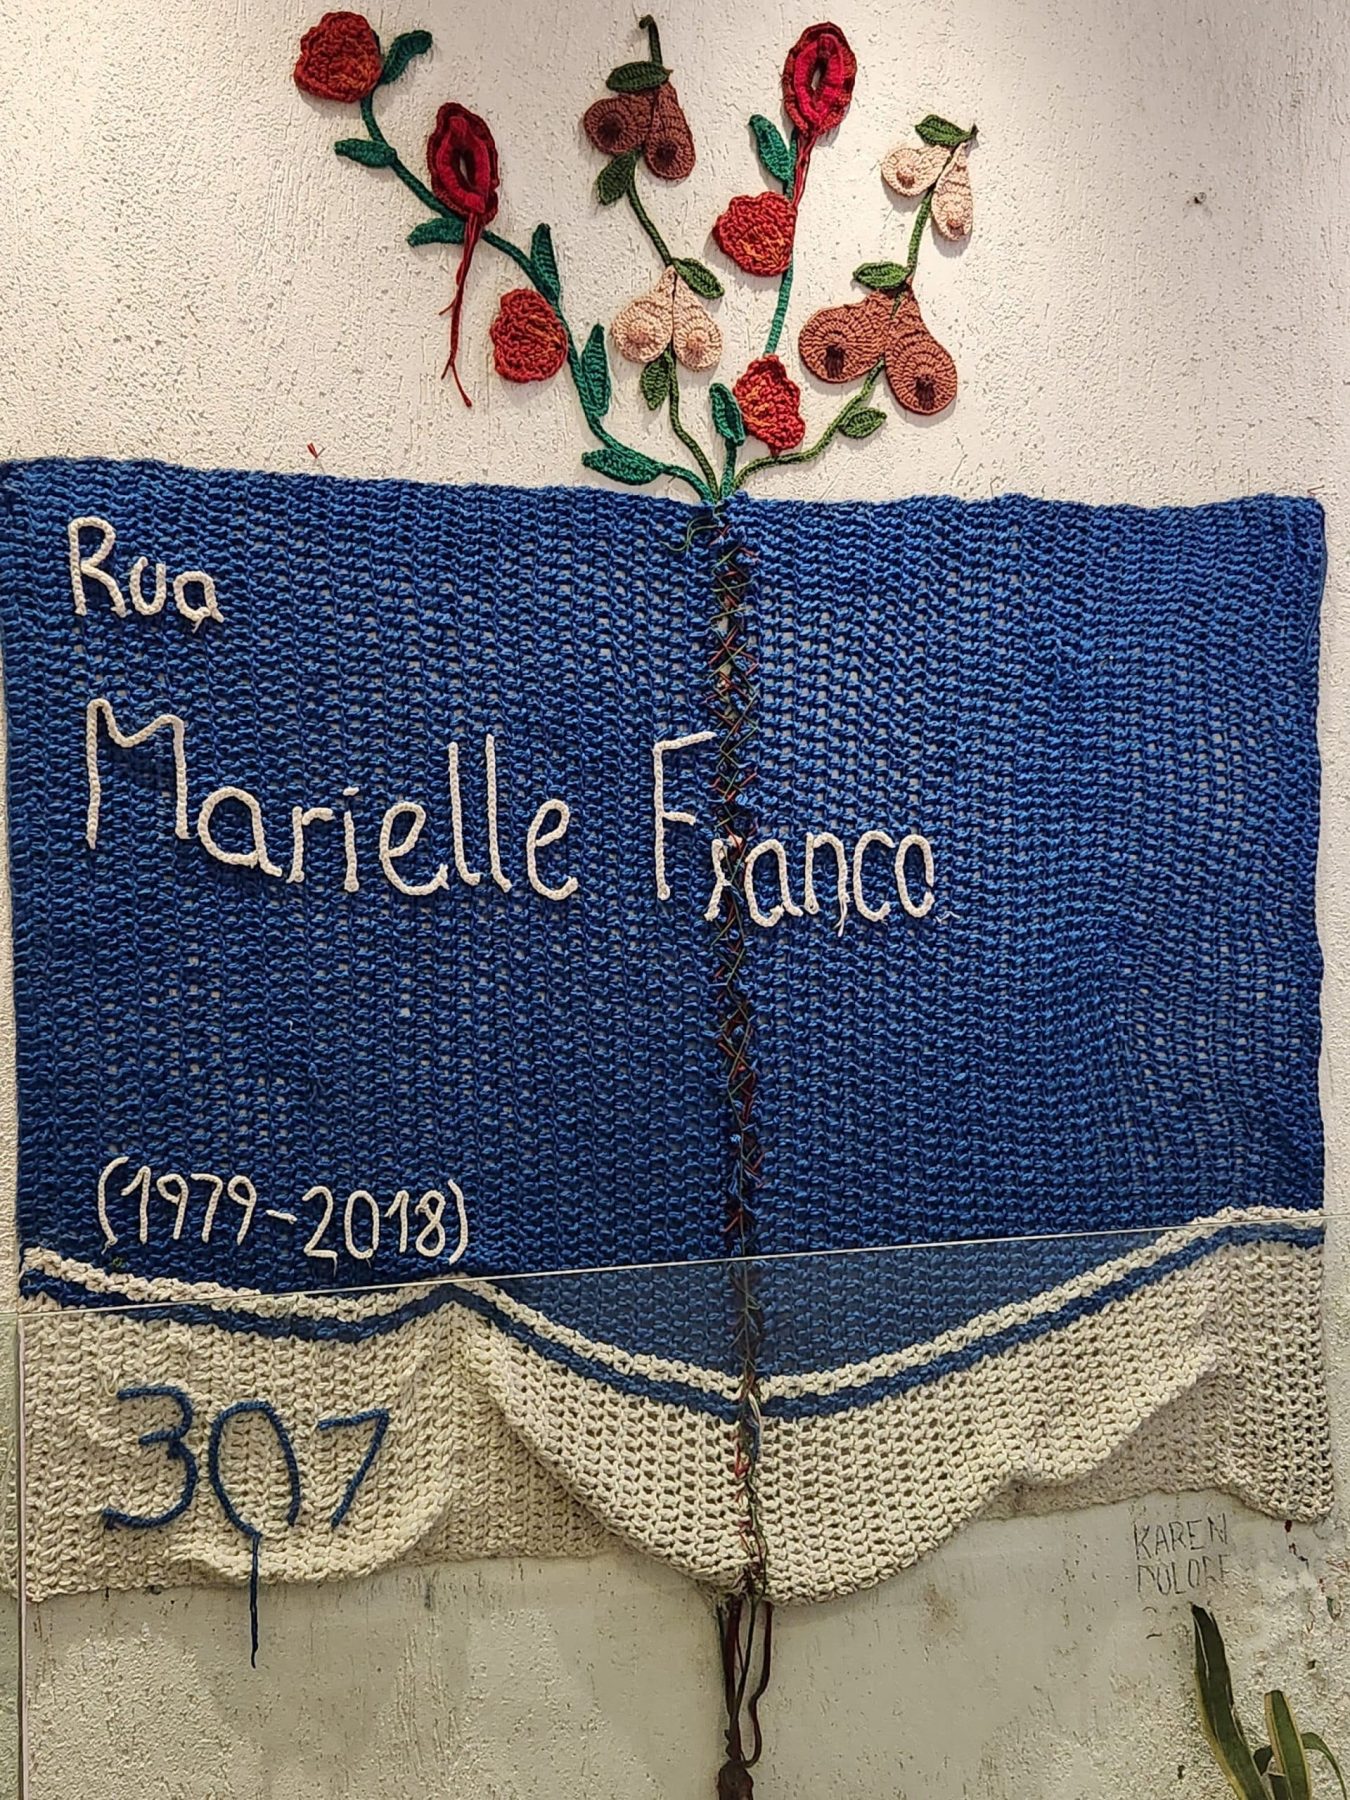 A blue and white crocheted square reads "Rua Marielle Franco (1979-2018), 307." Crochet flowers extend from the top.